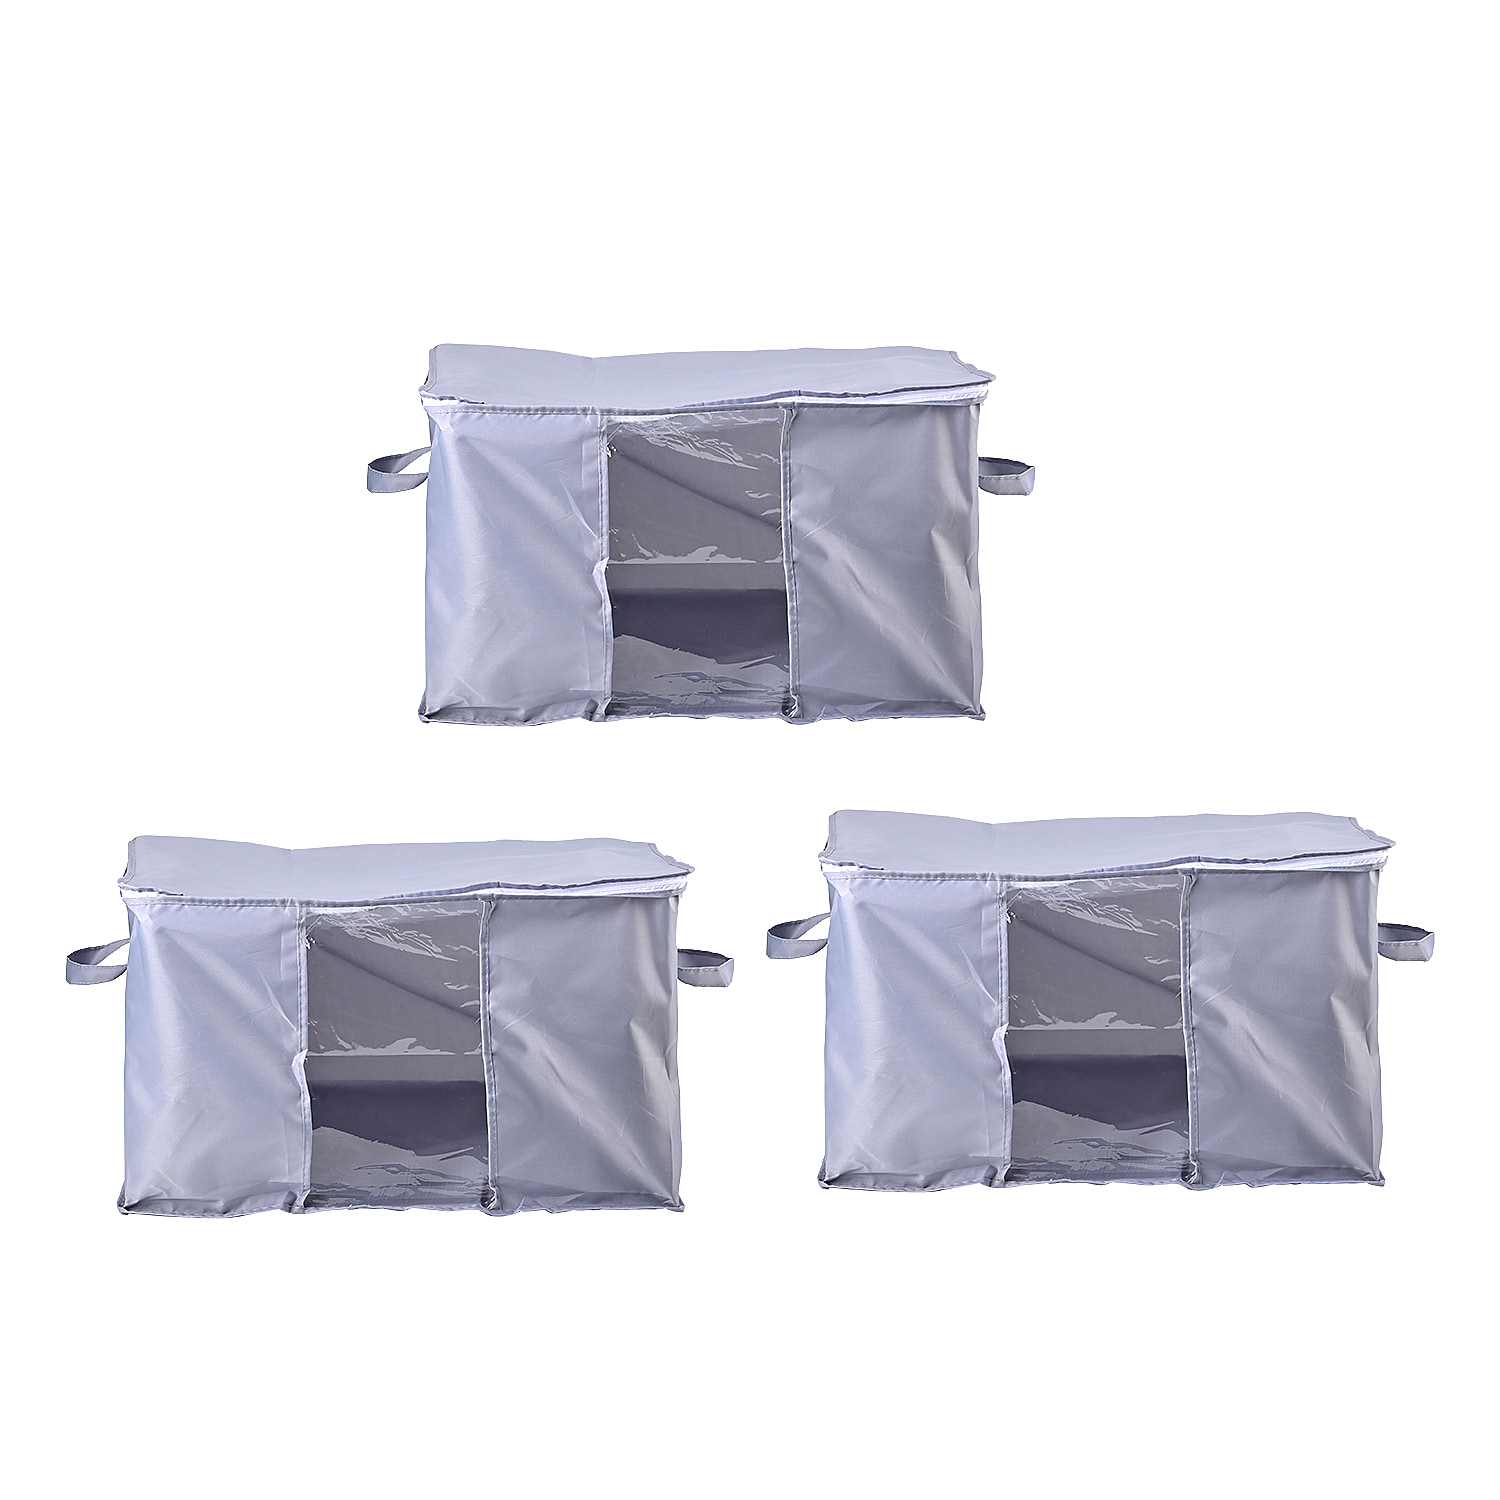 Set-of-3-Homesmart-Stackable-Storage-Bags-Size-60x40x35-cm-Grey